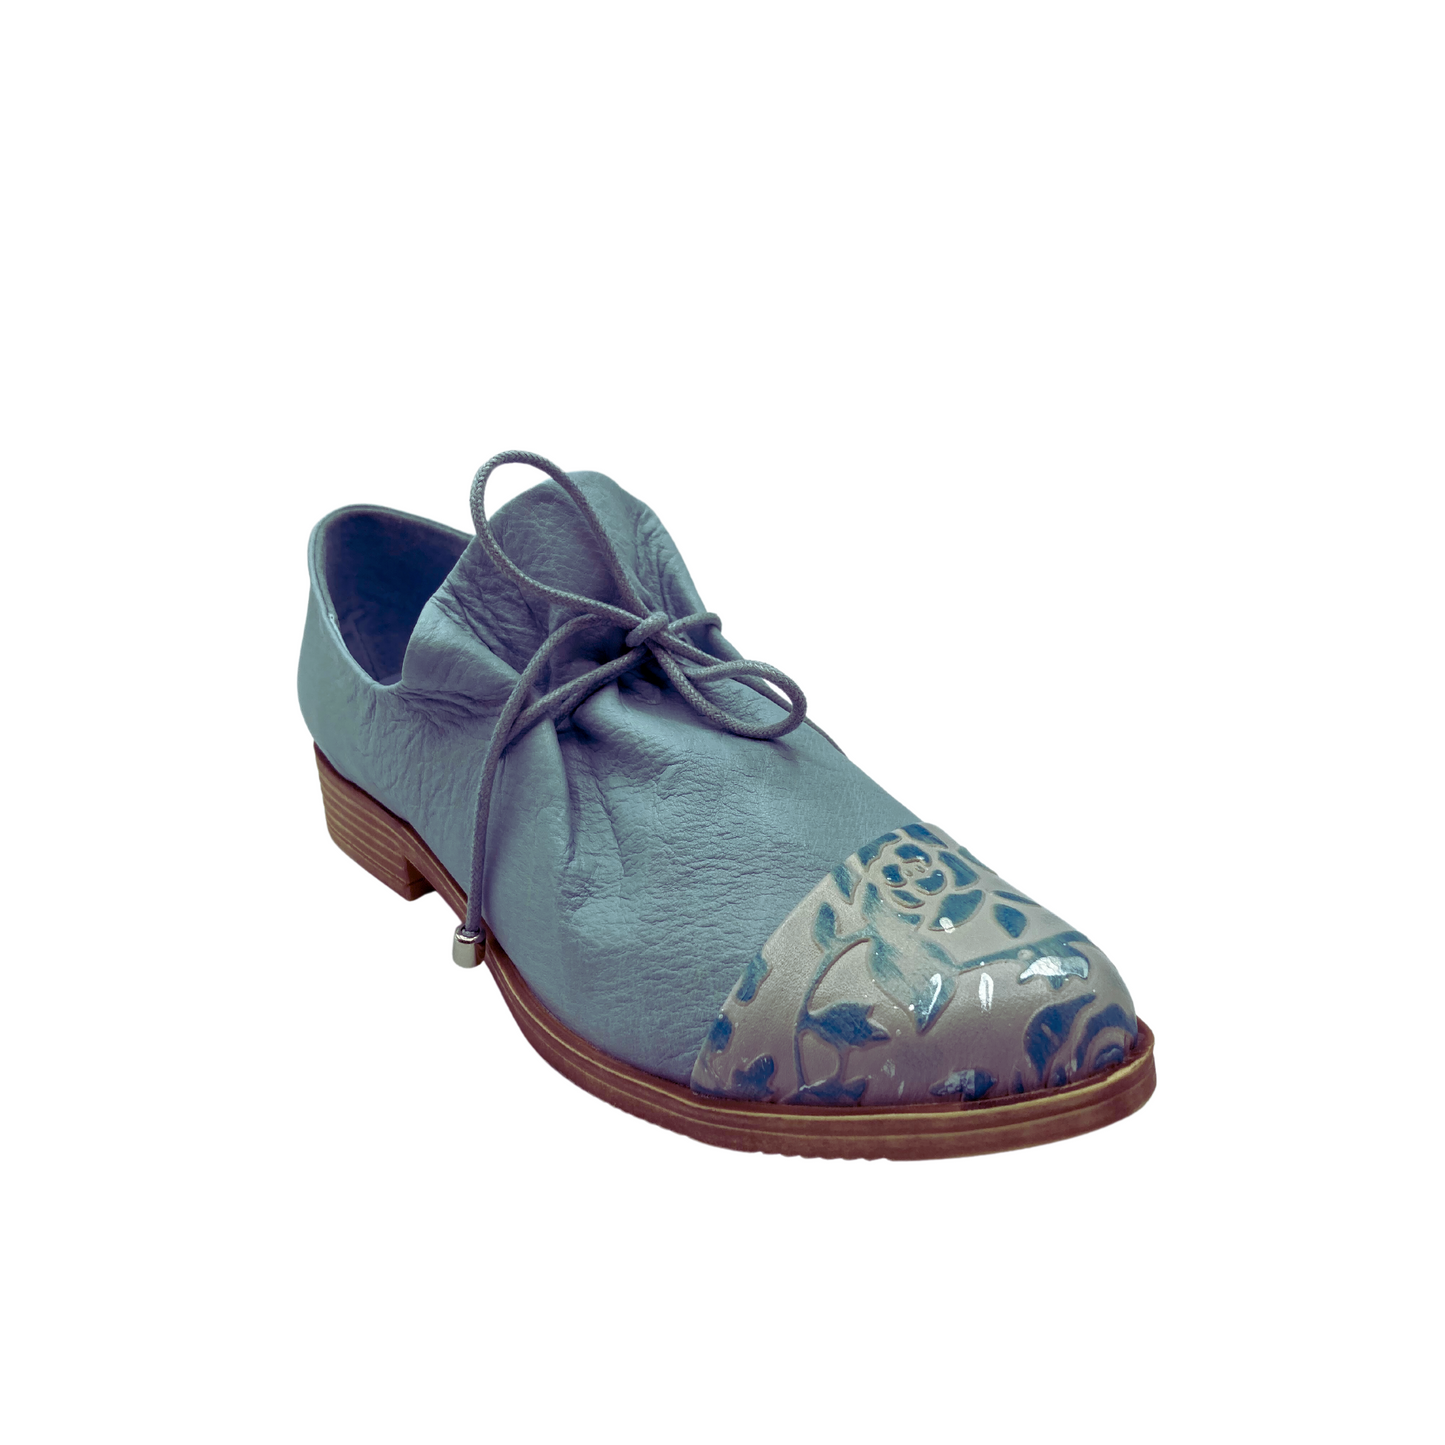 Angled front view of a special little loafer.  Done in a denim blue color with a toe cap in an embossed blue/silver floral.  Laces in front to tighten fit and pull the ruched leather tongue together.